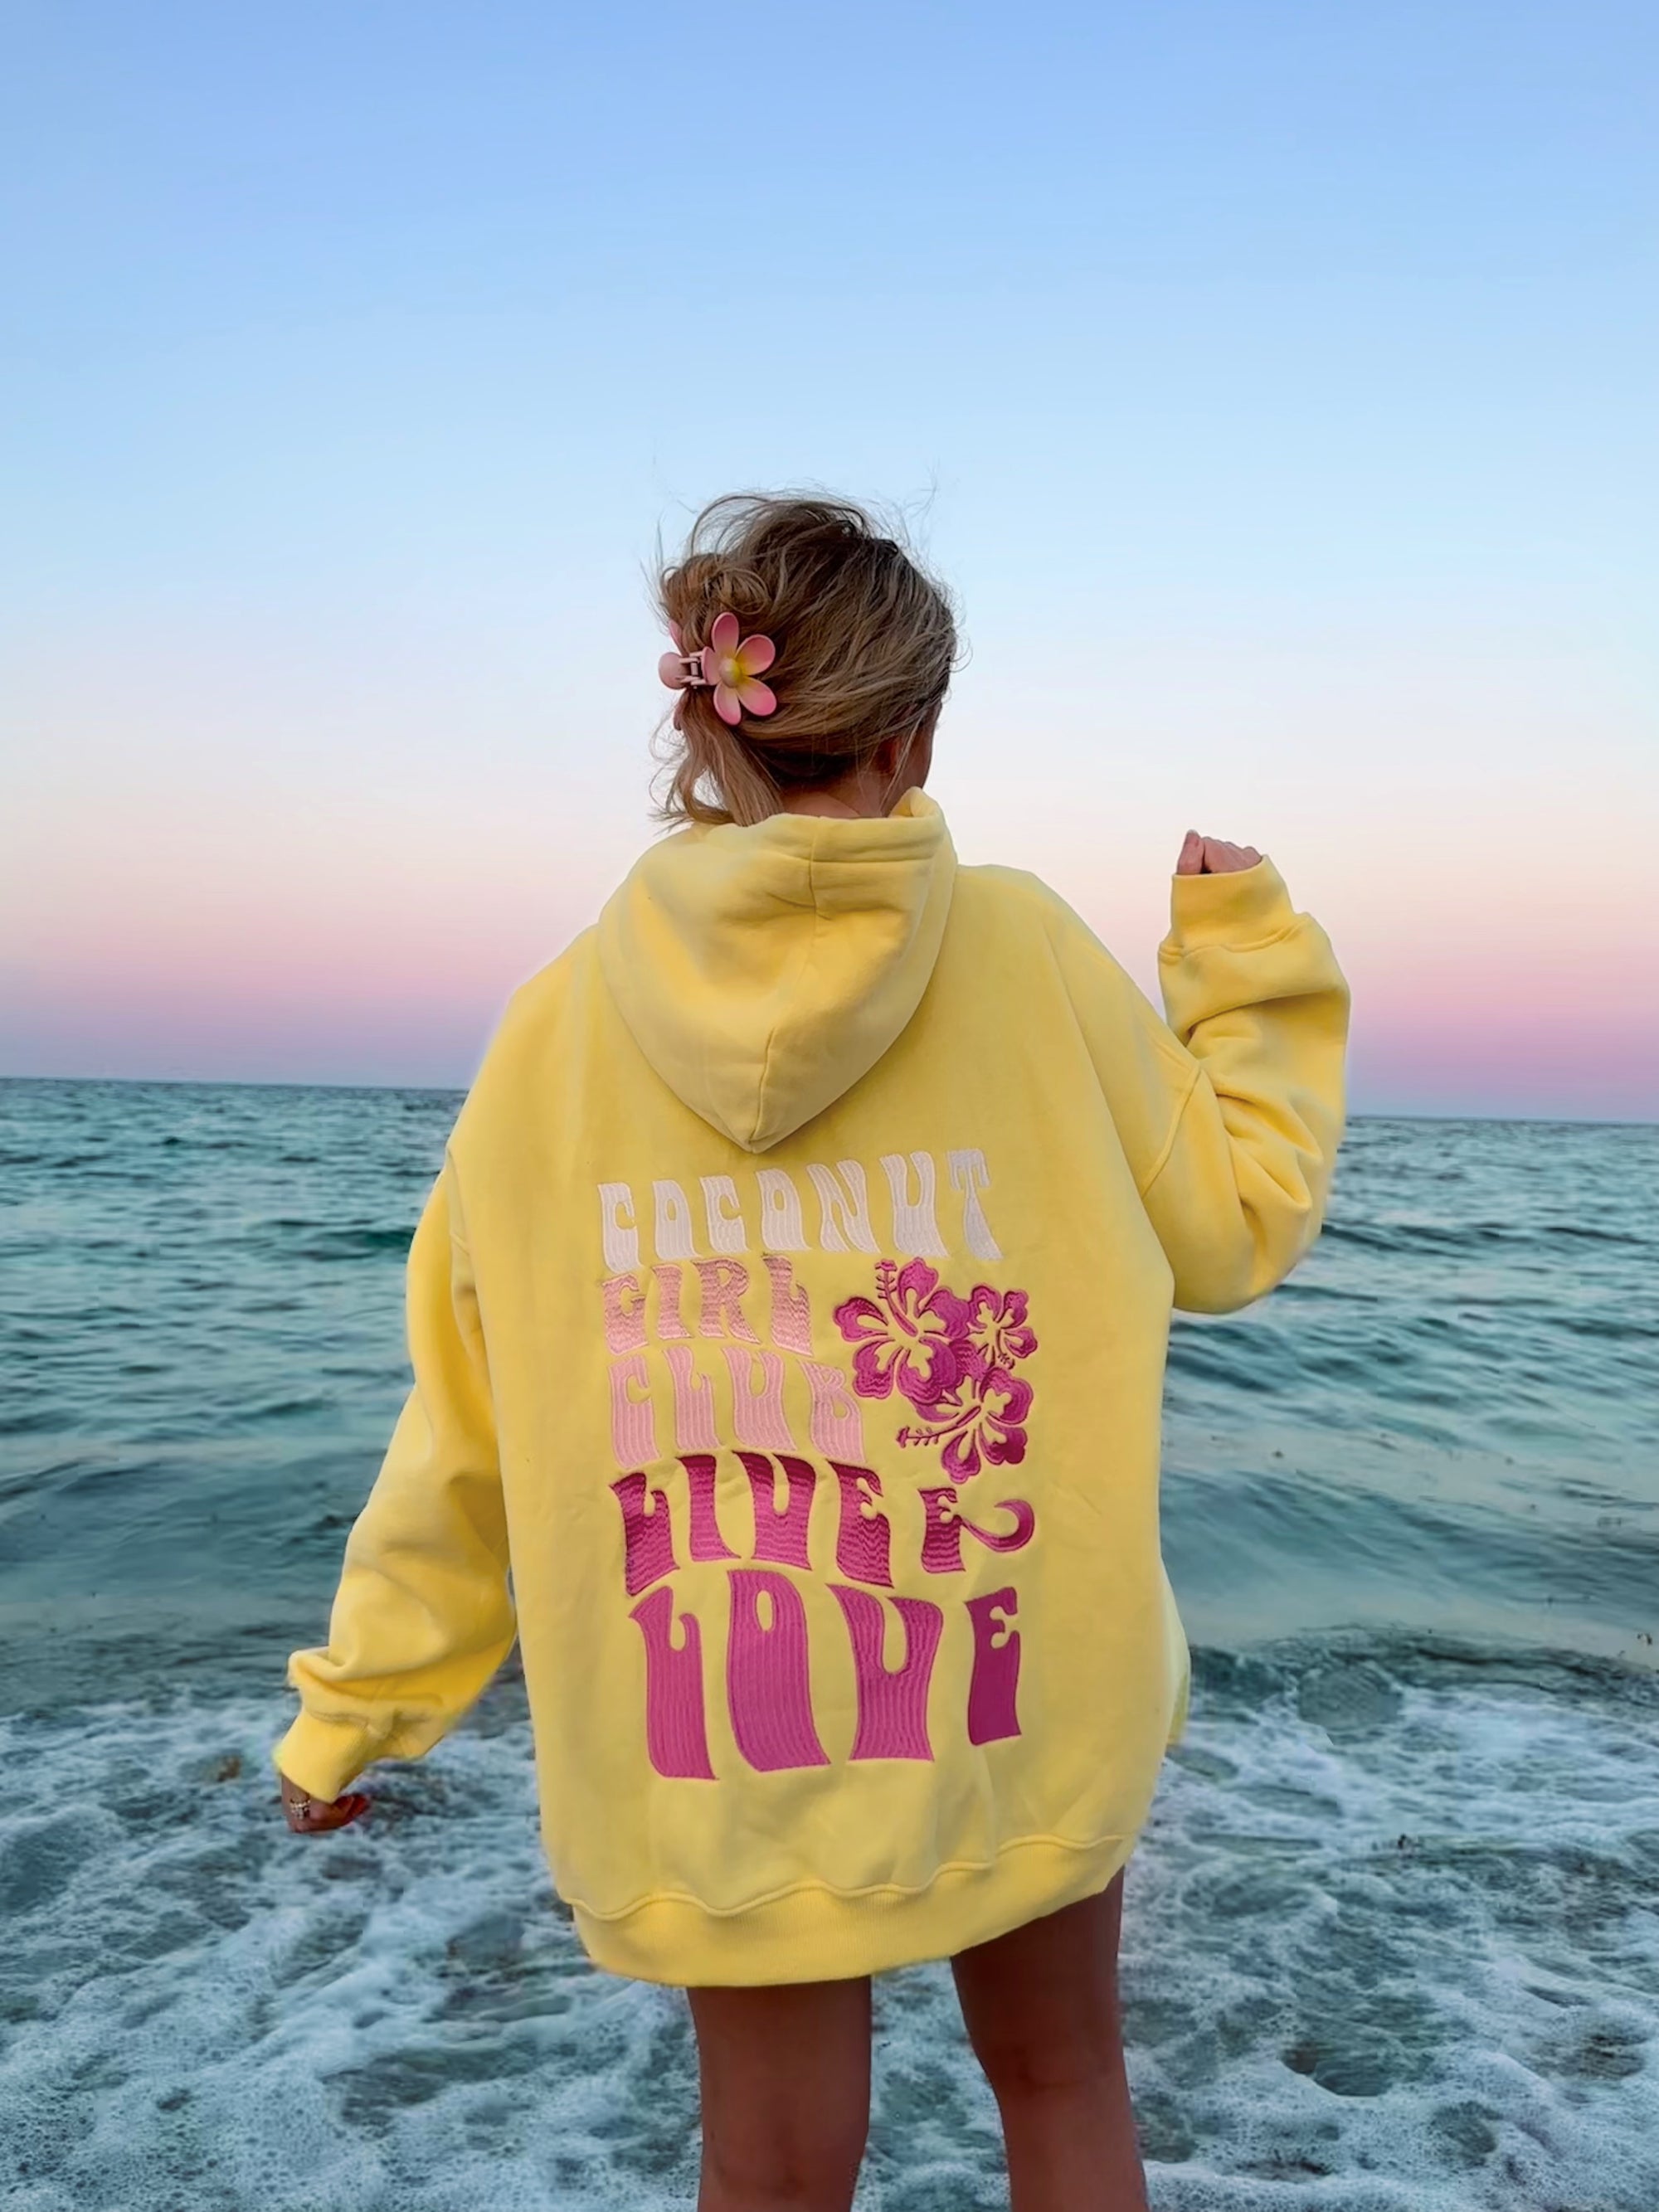 WIND AND SEA (INVER) HOODIE Yellow - www.bleachcolorgrading.com